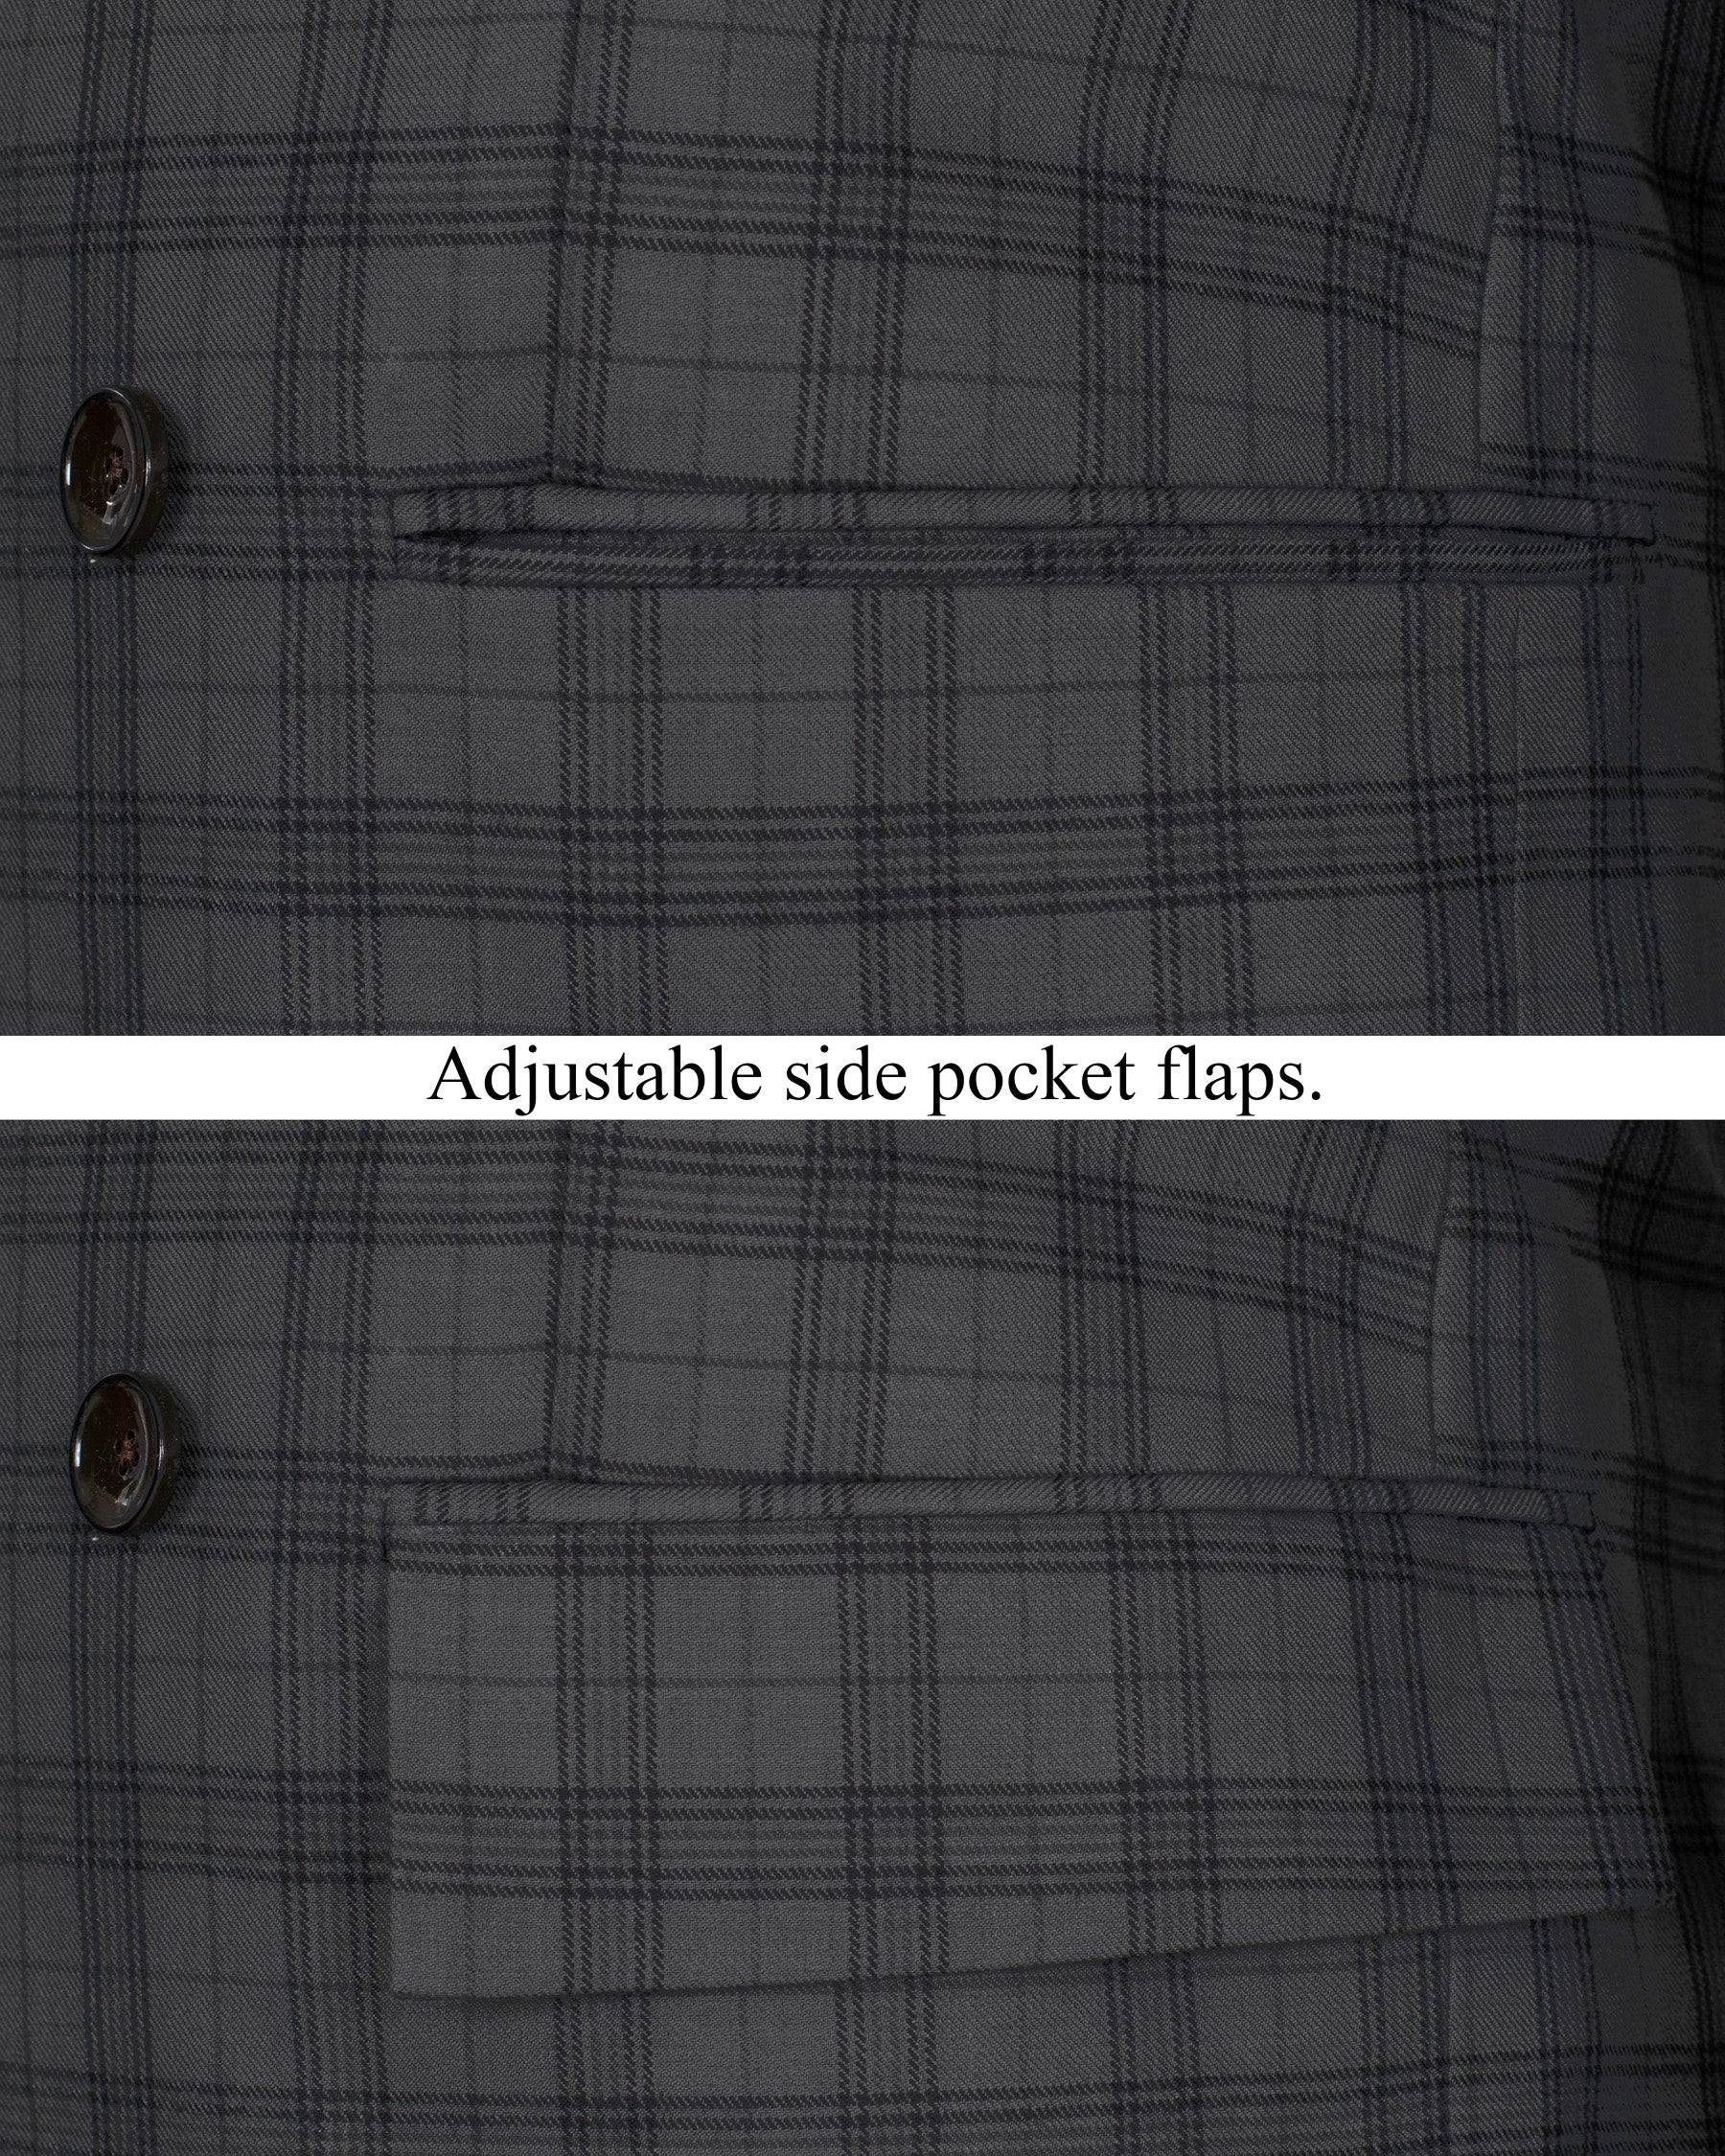 Masala Grey Plaid Double Breasted Wool Rich Blazer BL1367-DB-36, BL1367-DB-38, BL1367-DB-40, BL1367-DB-42, BL1367-DB-44, BL1367-DB-46, BL1367-DB-48, BL1367-DB-50, BL1367-DB-52, BL1367-DB-54, BL1367-DB-56, BL1367-DB-58, BL1367-DB-60